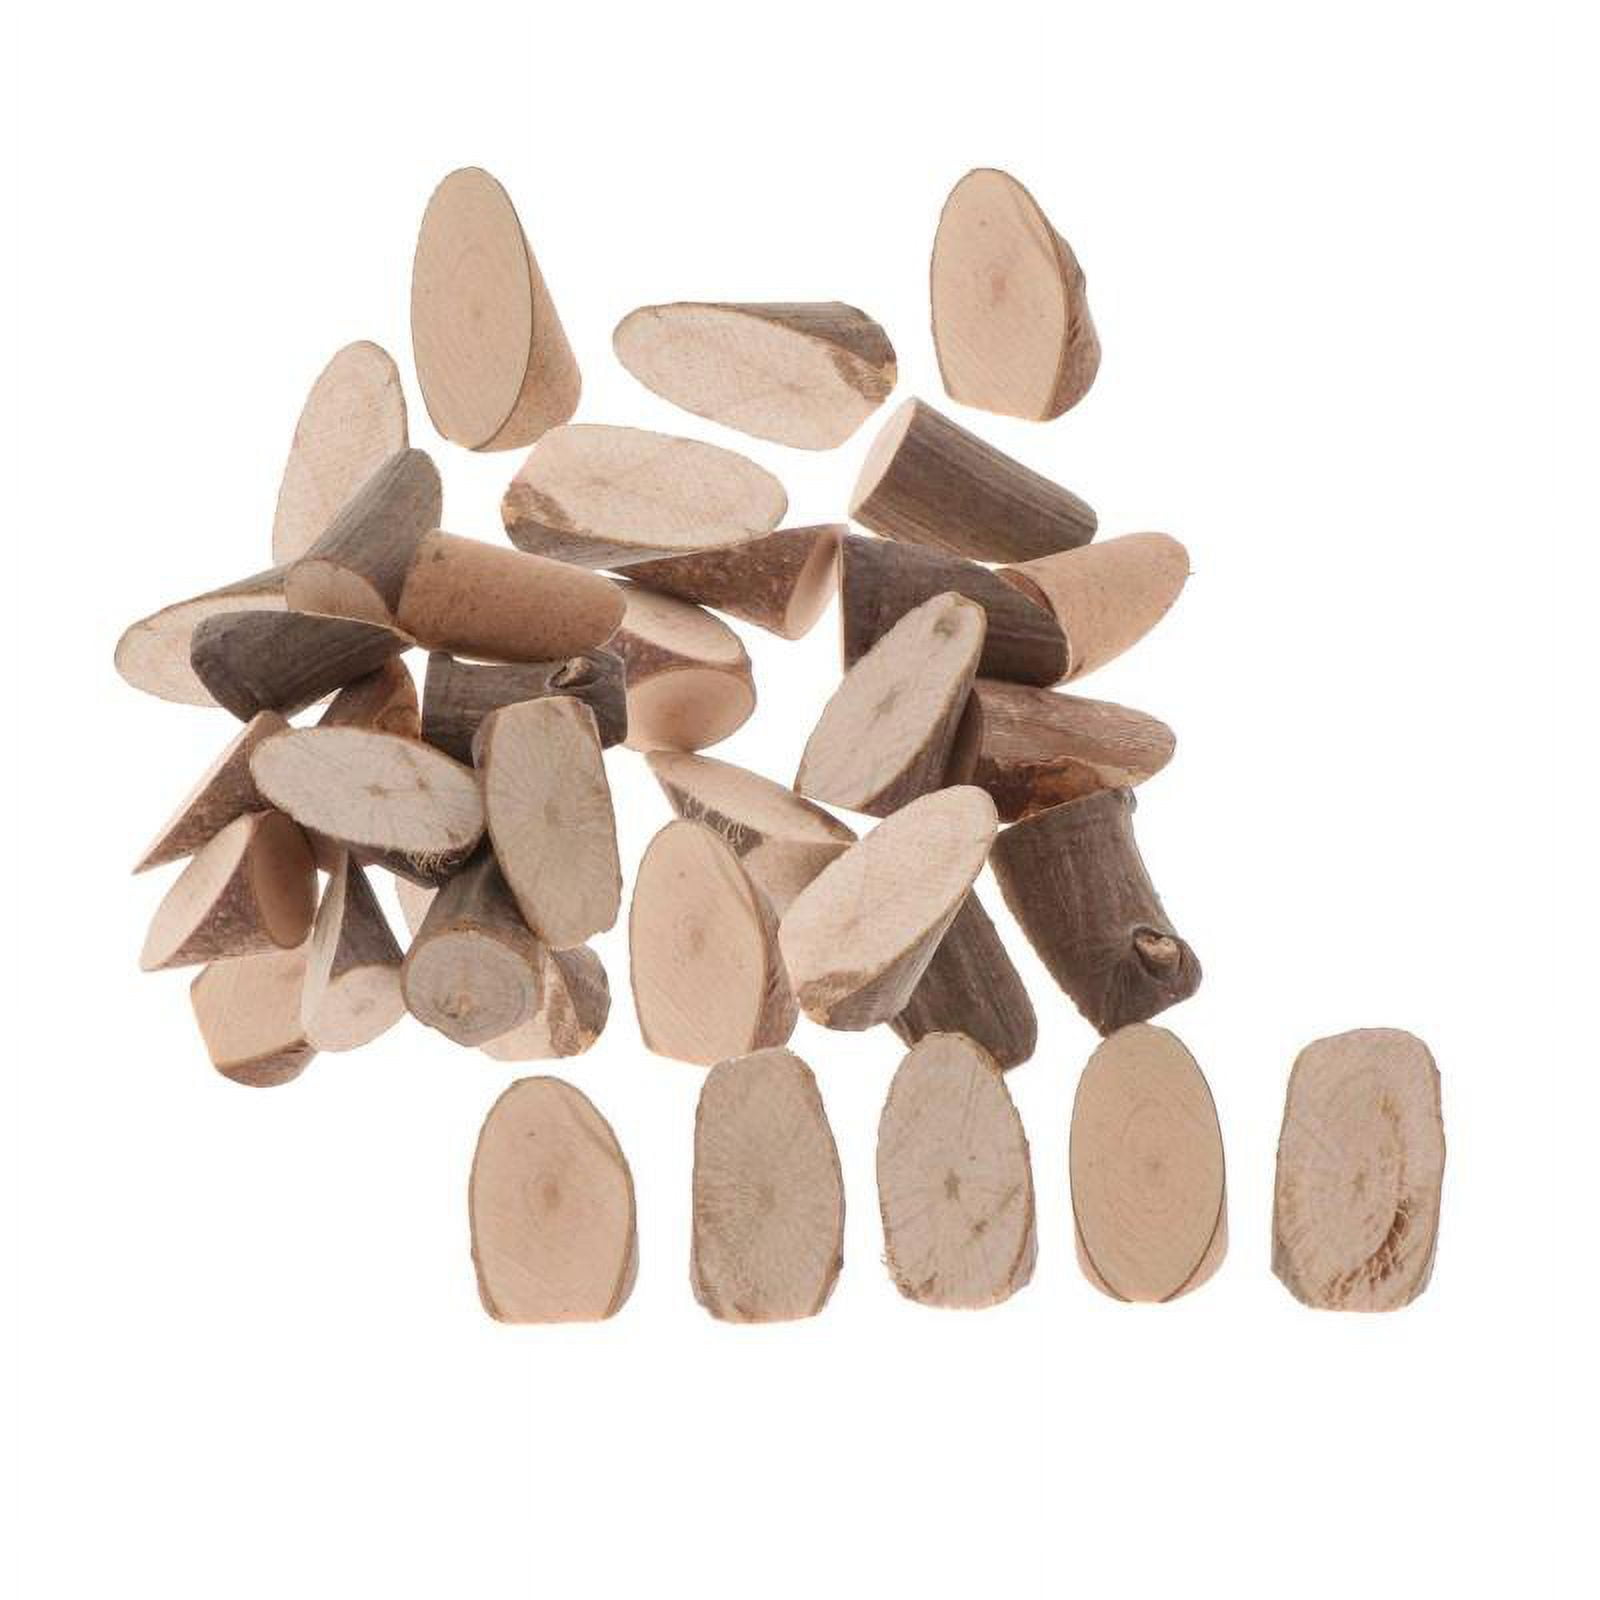 Portable Wood Slices Crafts Pyrography Unfinished Decor Wood Blocks Wooden  Wooden Slices Cute Wood Hearts For Crafts Bulk Diy - 40pcs Triangle